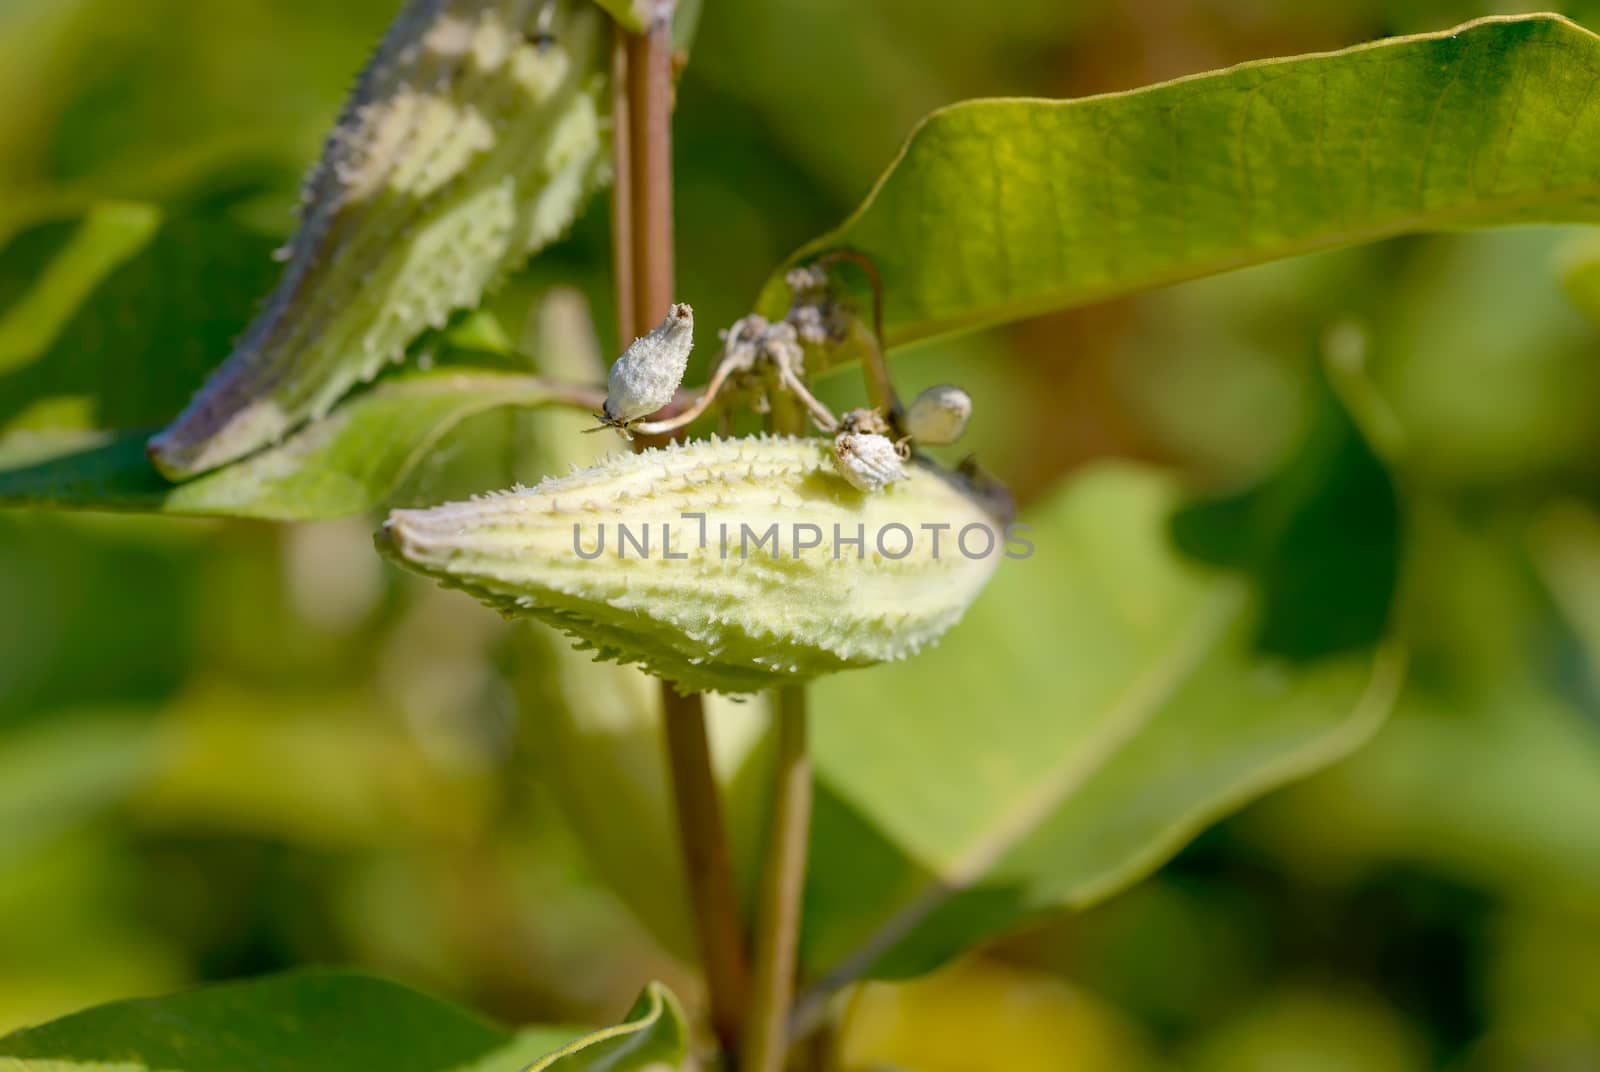 Closeup of the Asclepias Syriaca fruit, also called milkweed or silkweed. This plant produces latex